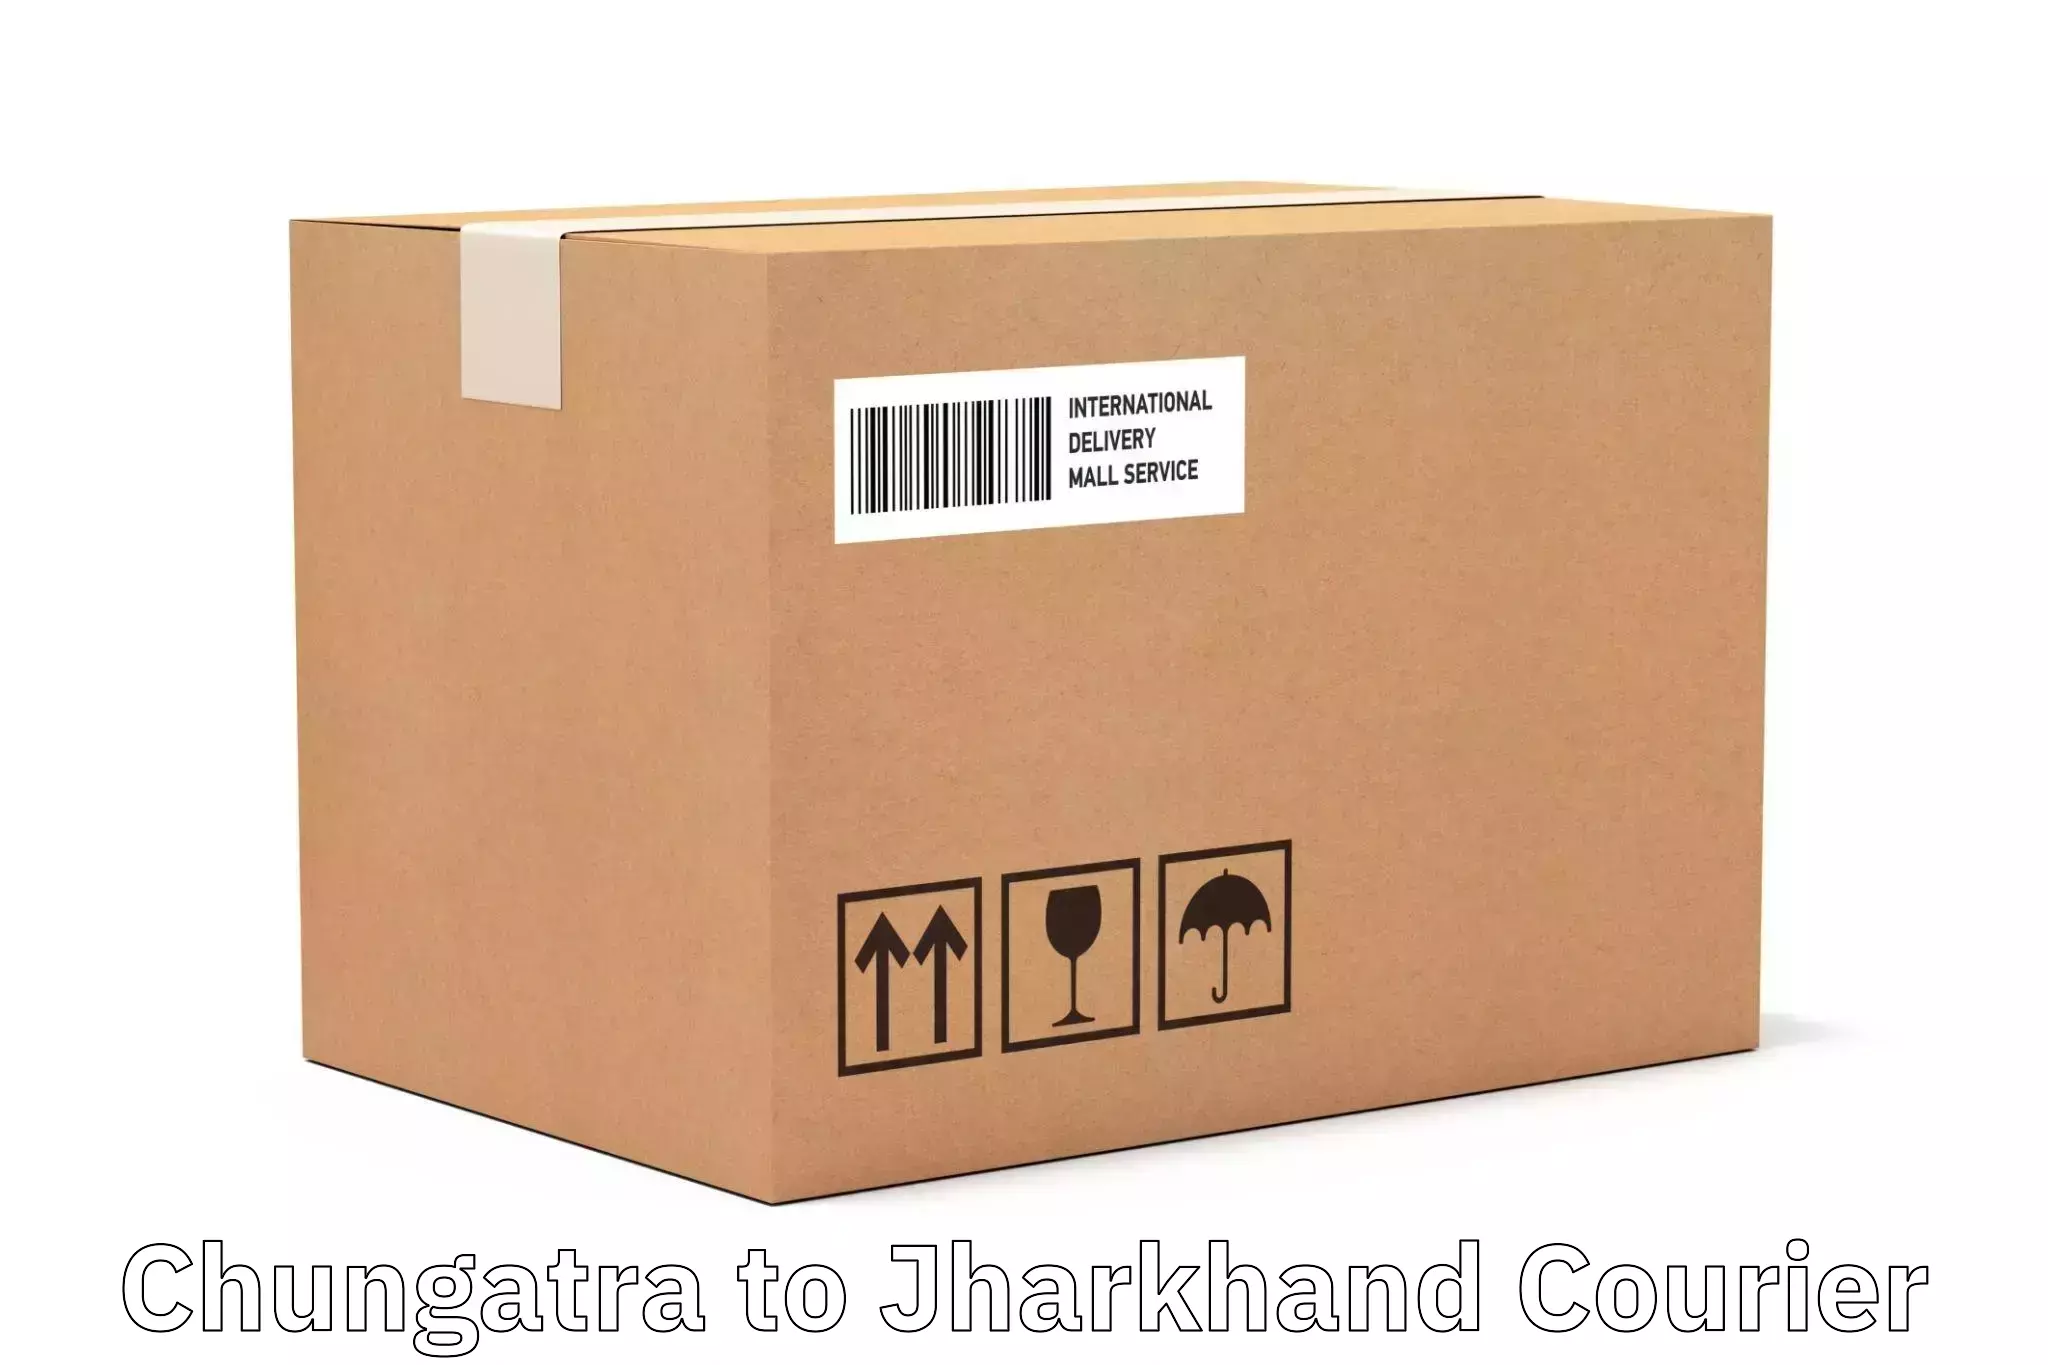 State-of-the-art courier technology Chungatra to Ranka Garhwa